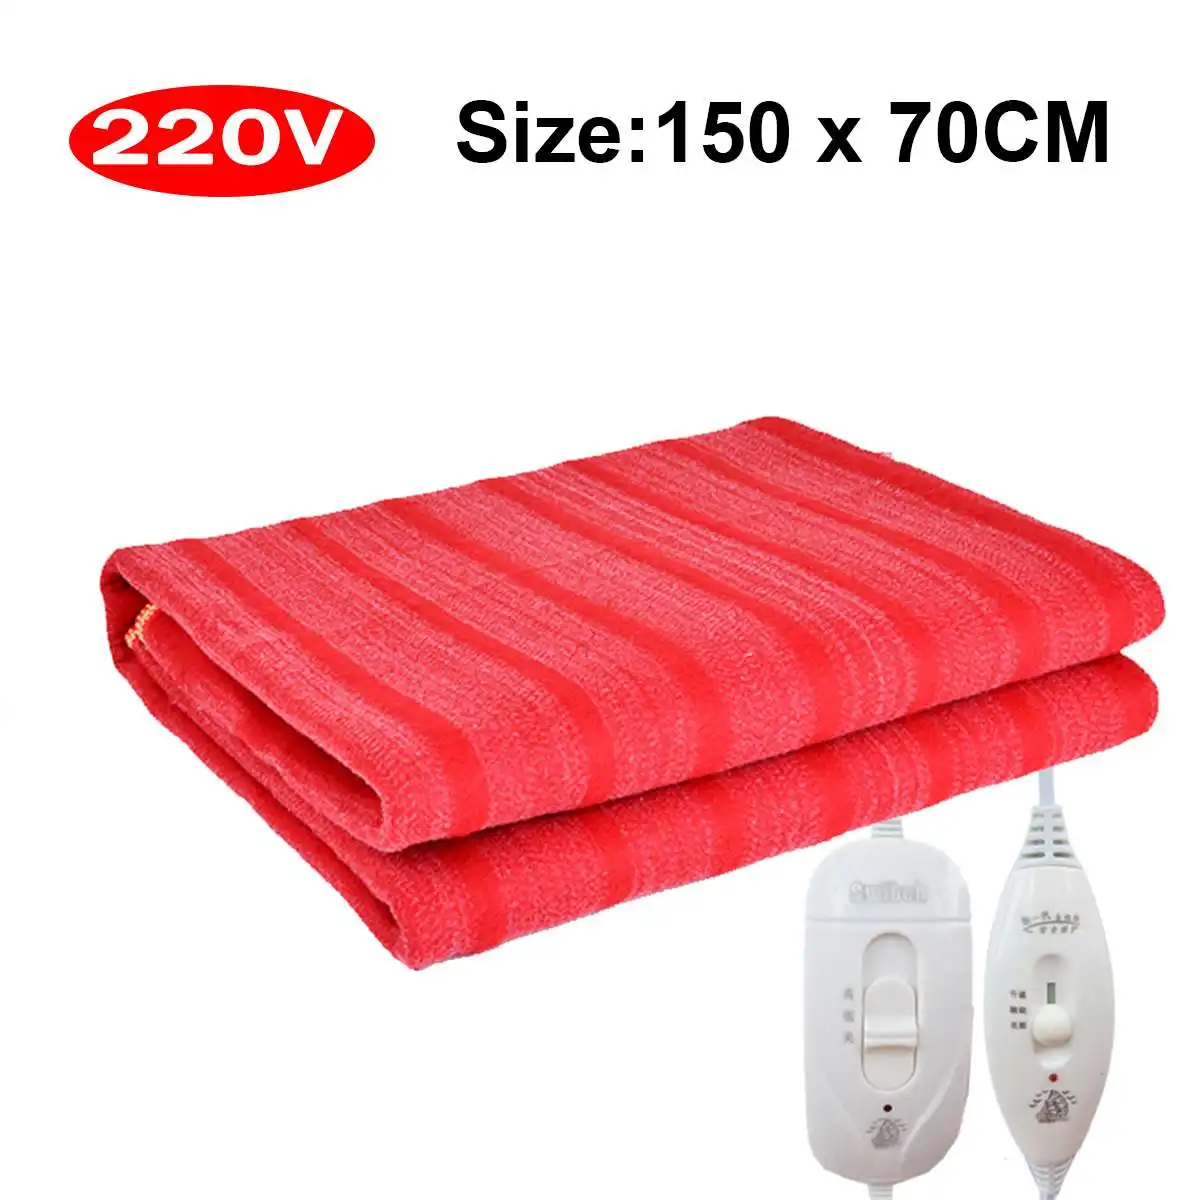 150x70cm 110V/220V Electric Blanket Heater Single Body Warmer Heated Blanket Thermostat Electric Heating Blanket for Winter